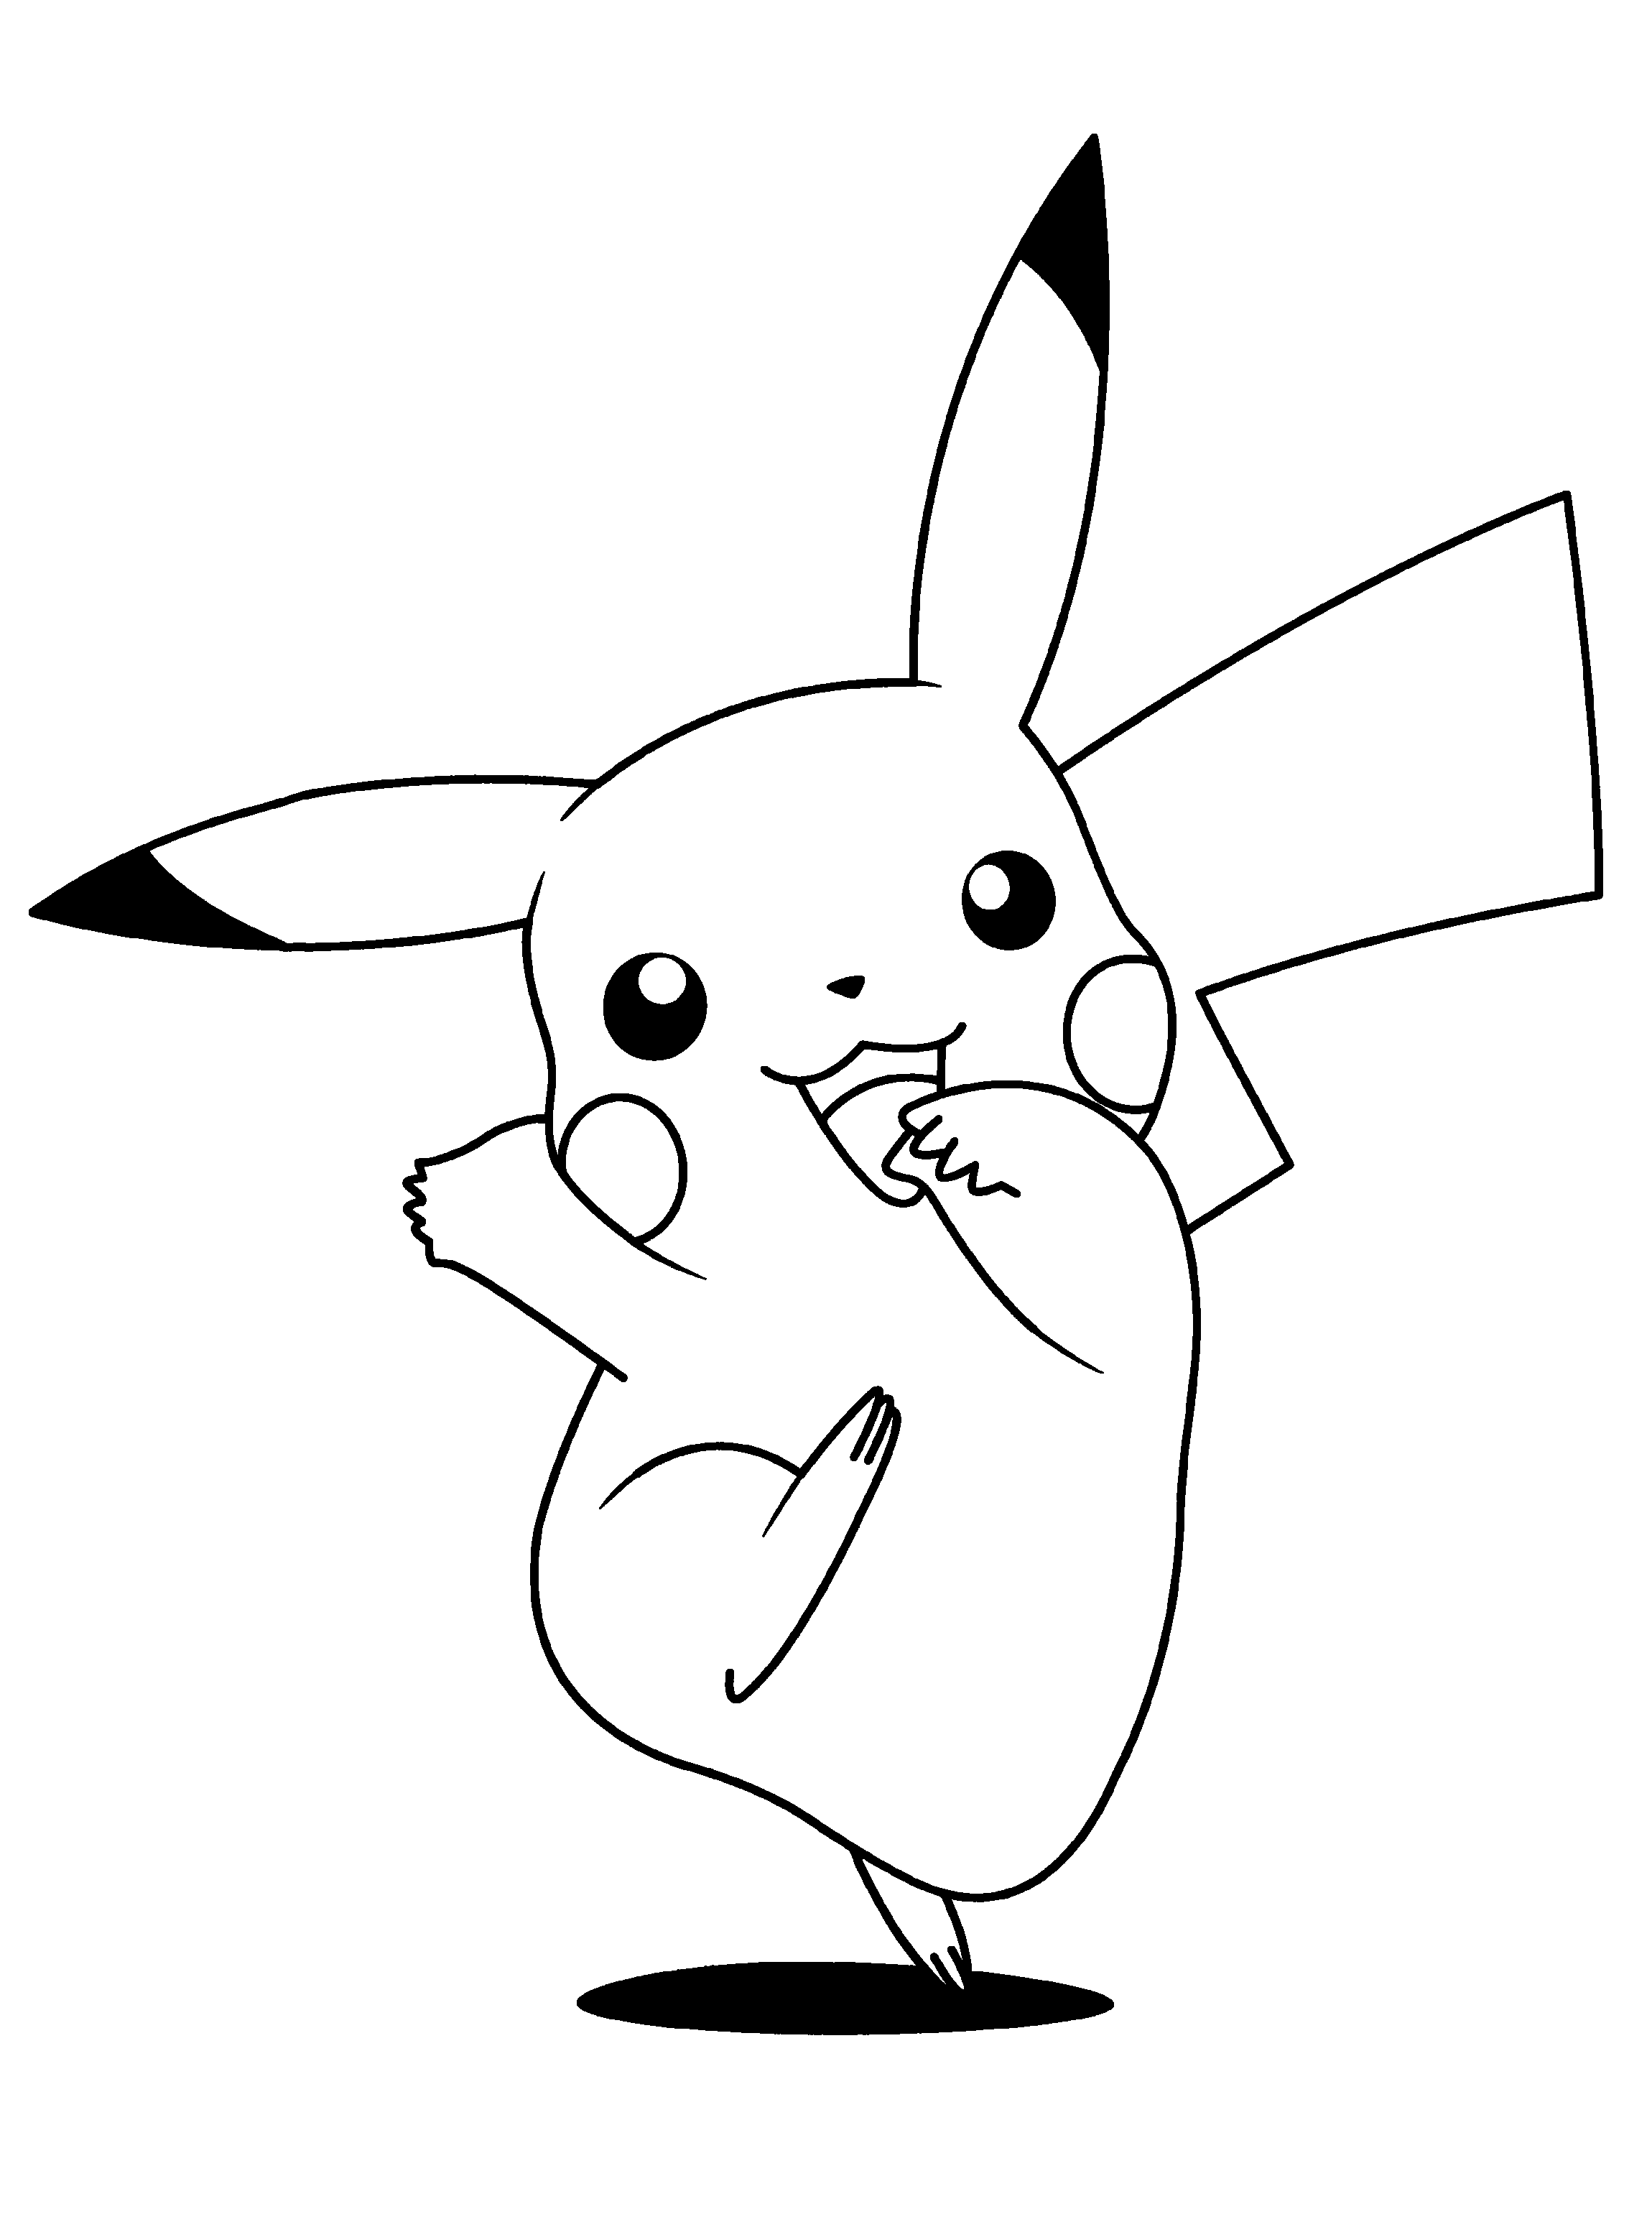 Pokemon Coloring Pages (6) Coloring Kids - Coloring Kids